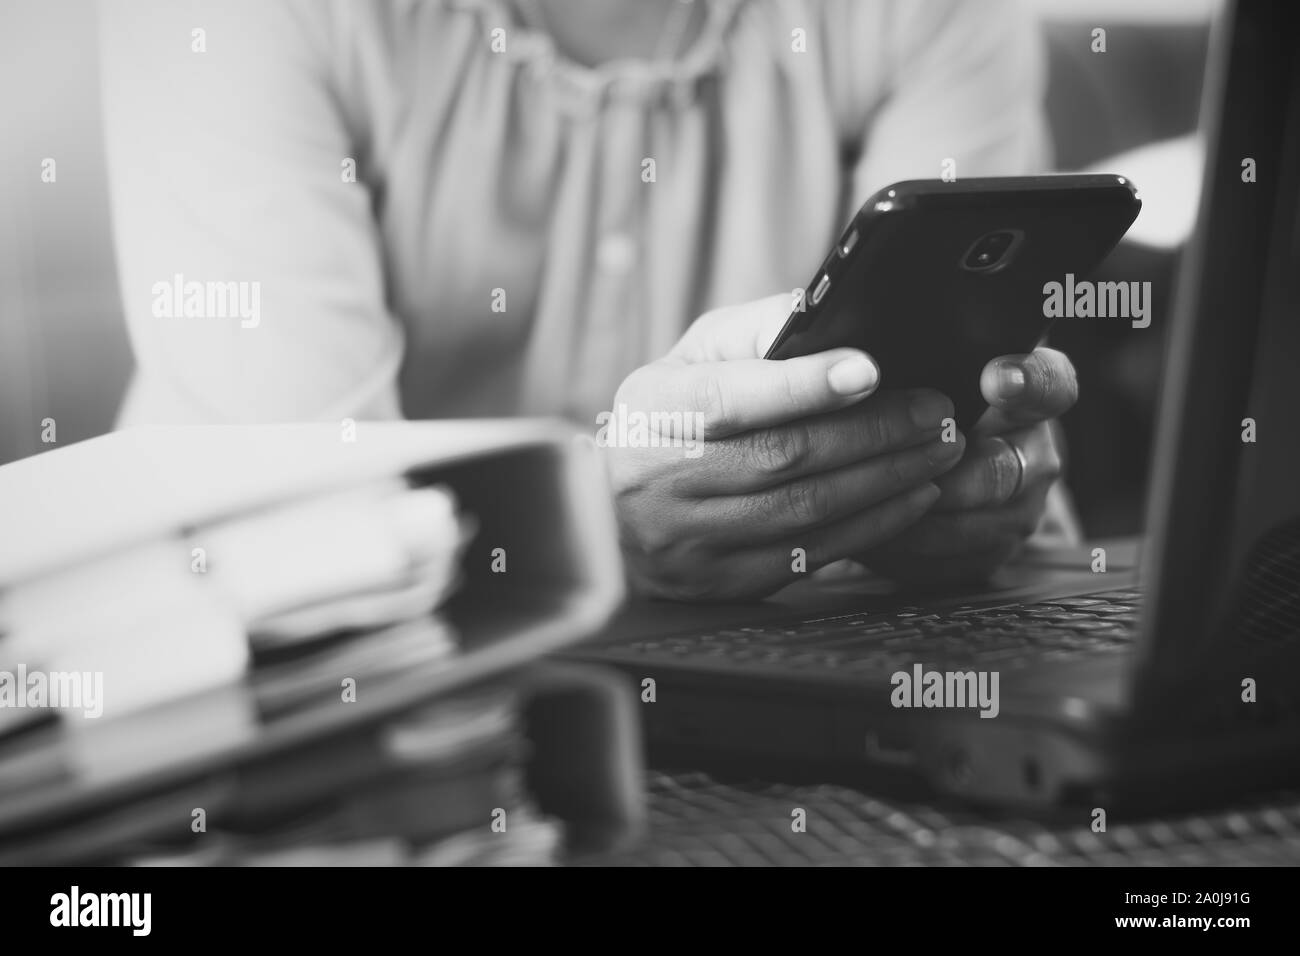 Hands of woman using mobile phone for payments online shopping with laptop and document on the table. Business and financial concept. Black and white Stock Photo